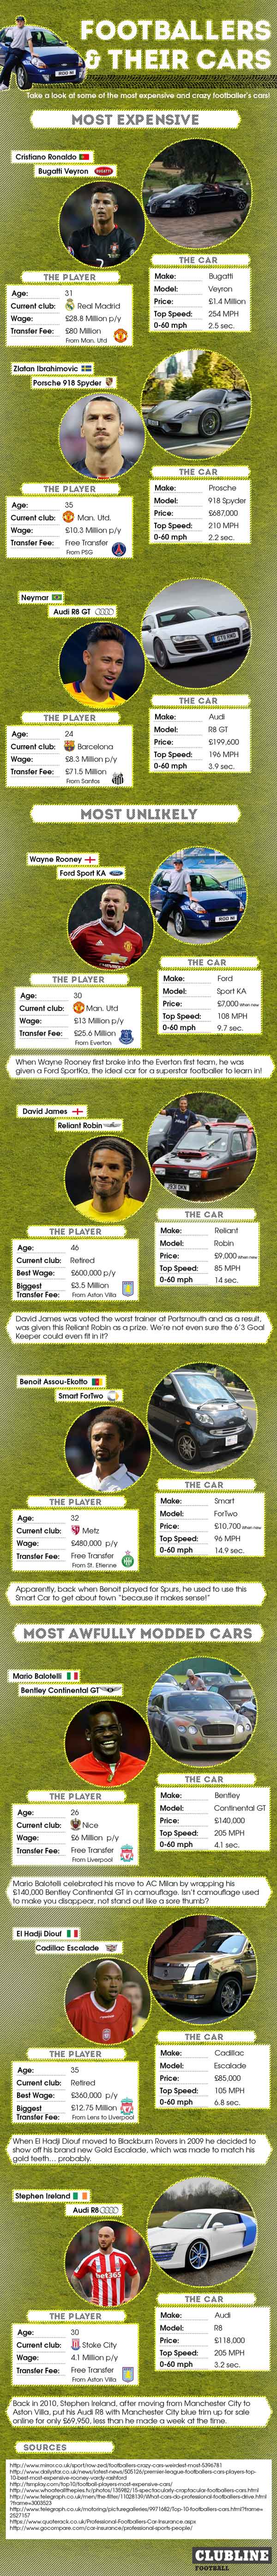 Footballers and their cars